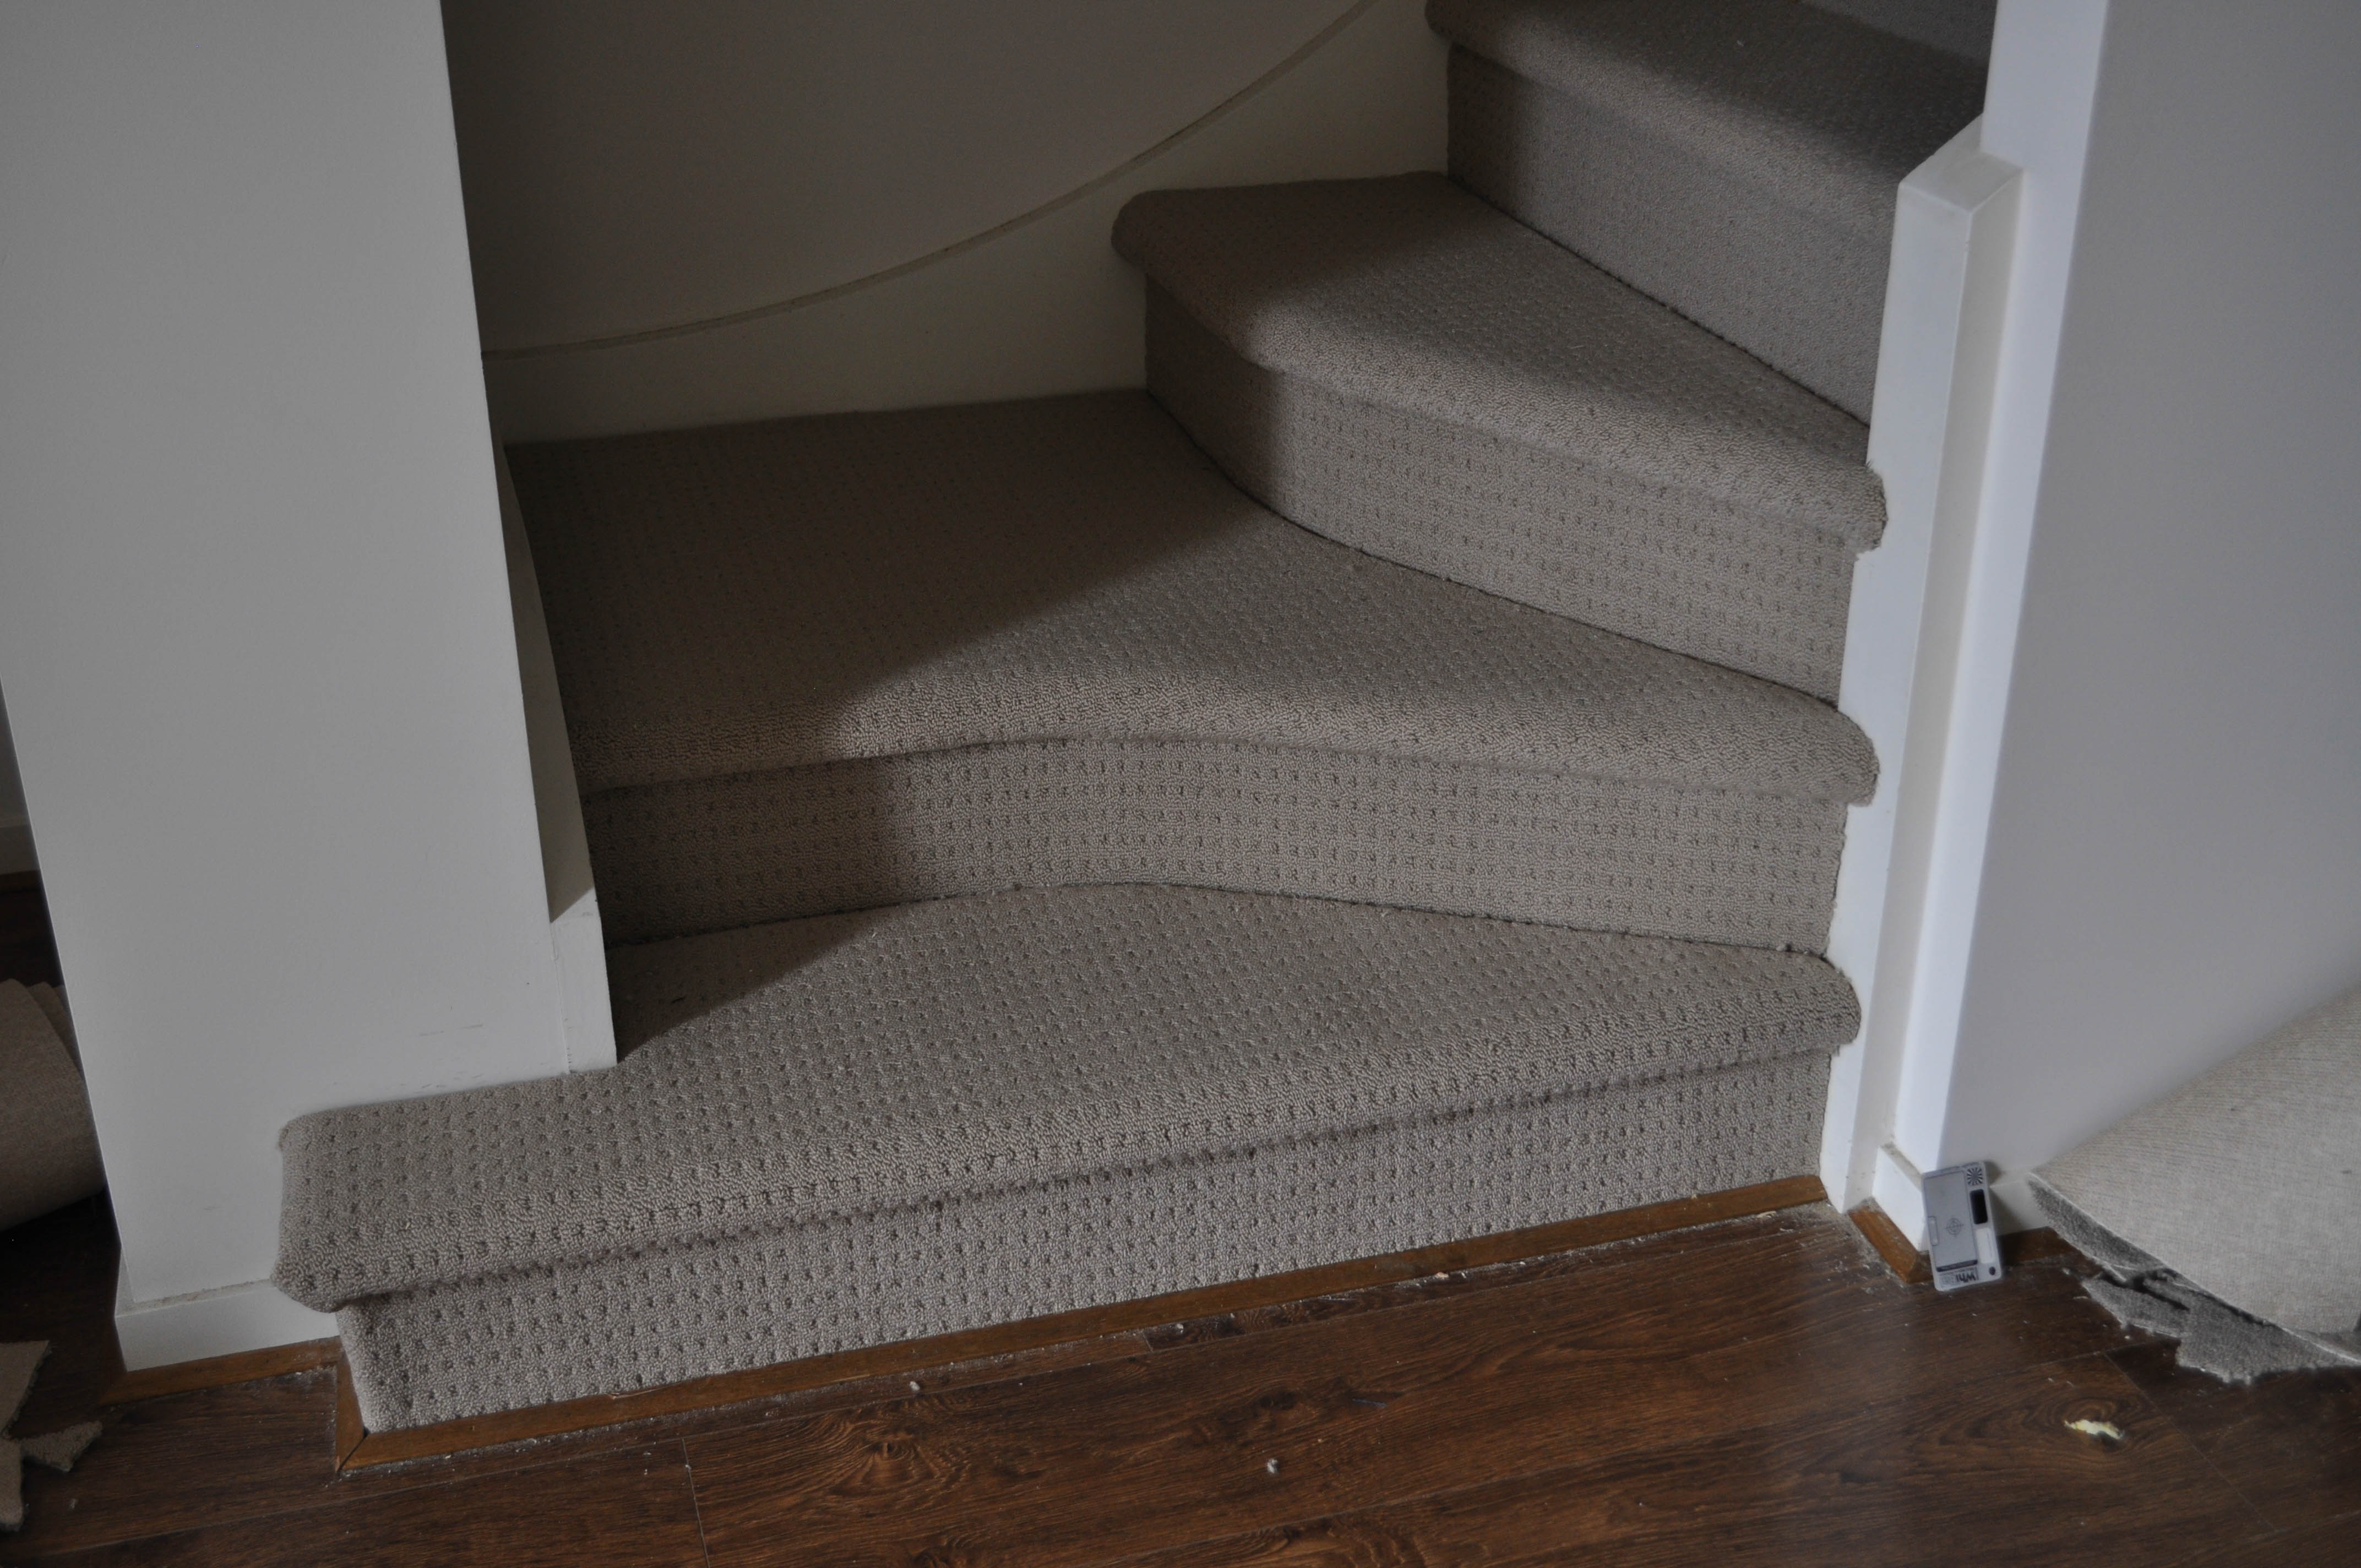 showing a staircase in which the carpet store Concord floors installed a patterned modulated loop-pile carpet of a light beige color, which has a rating of residential heavy duty including stairs